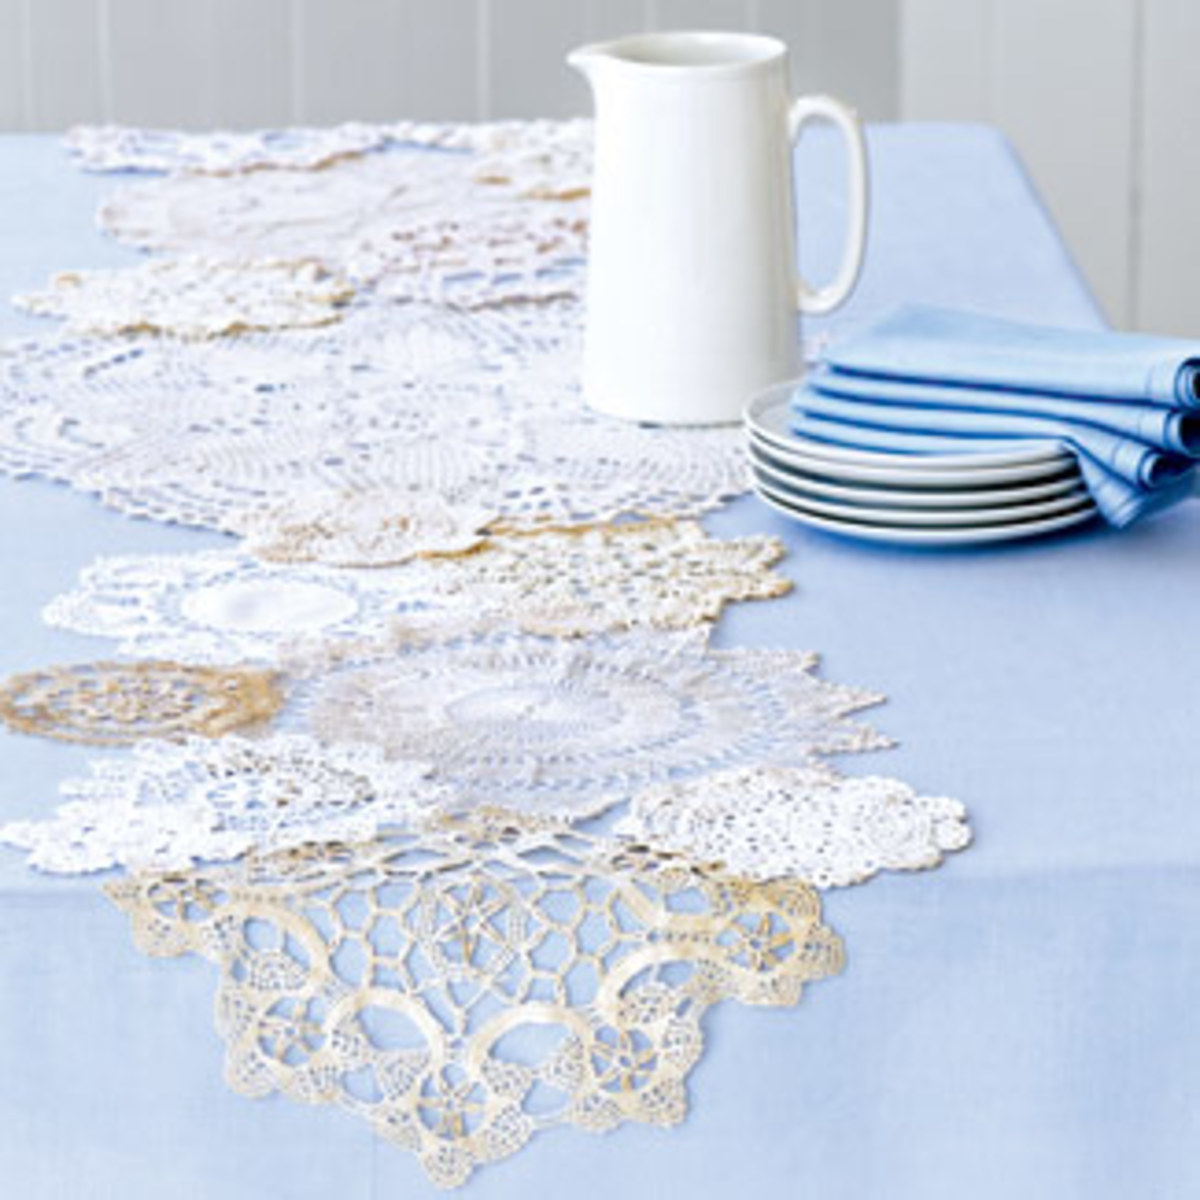 decorating-with-doilies-for-your-vintage-wedding